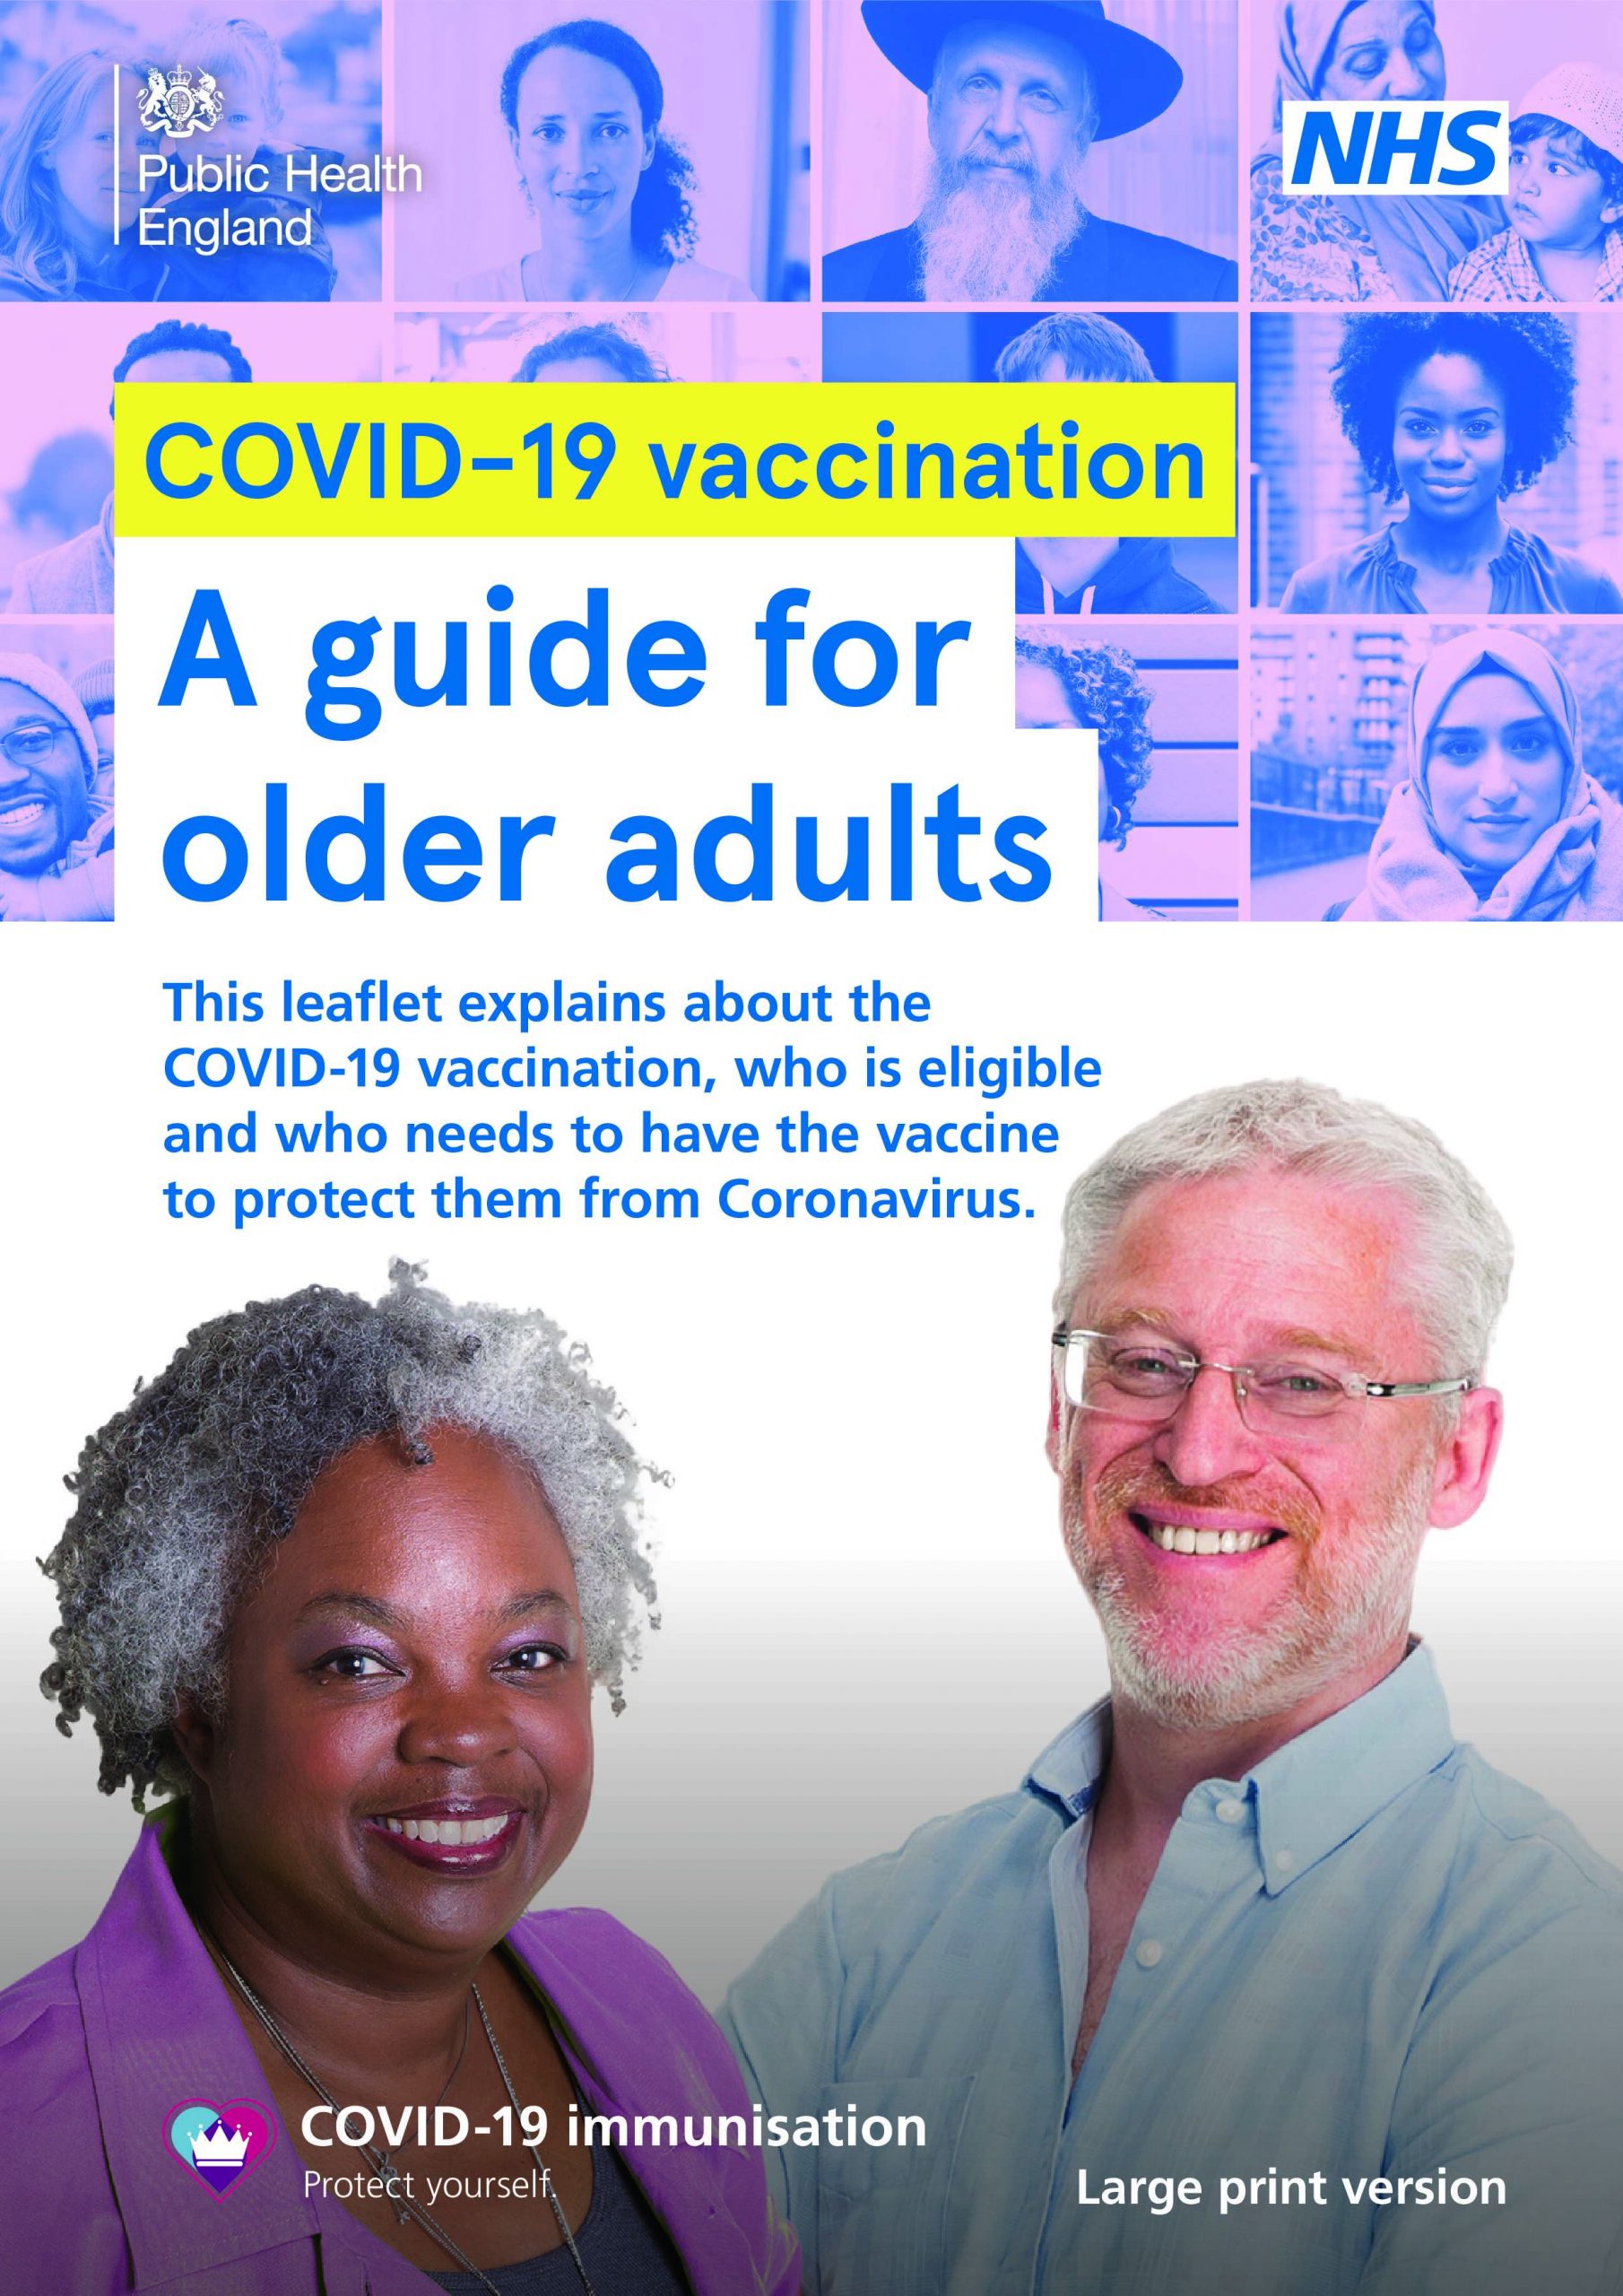 PHE_COVID-19_vaccination_guide_for_older_adults_large_p-0